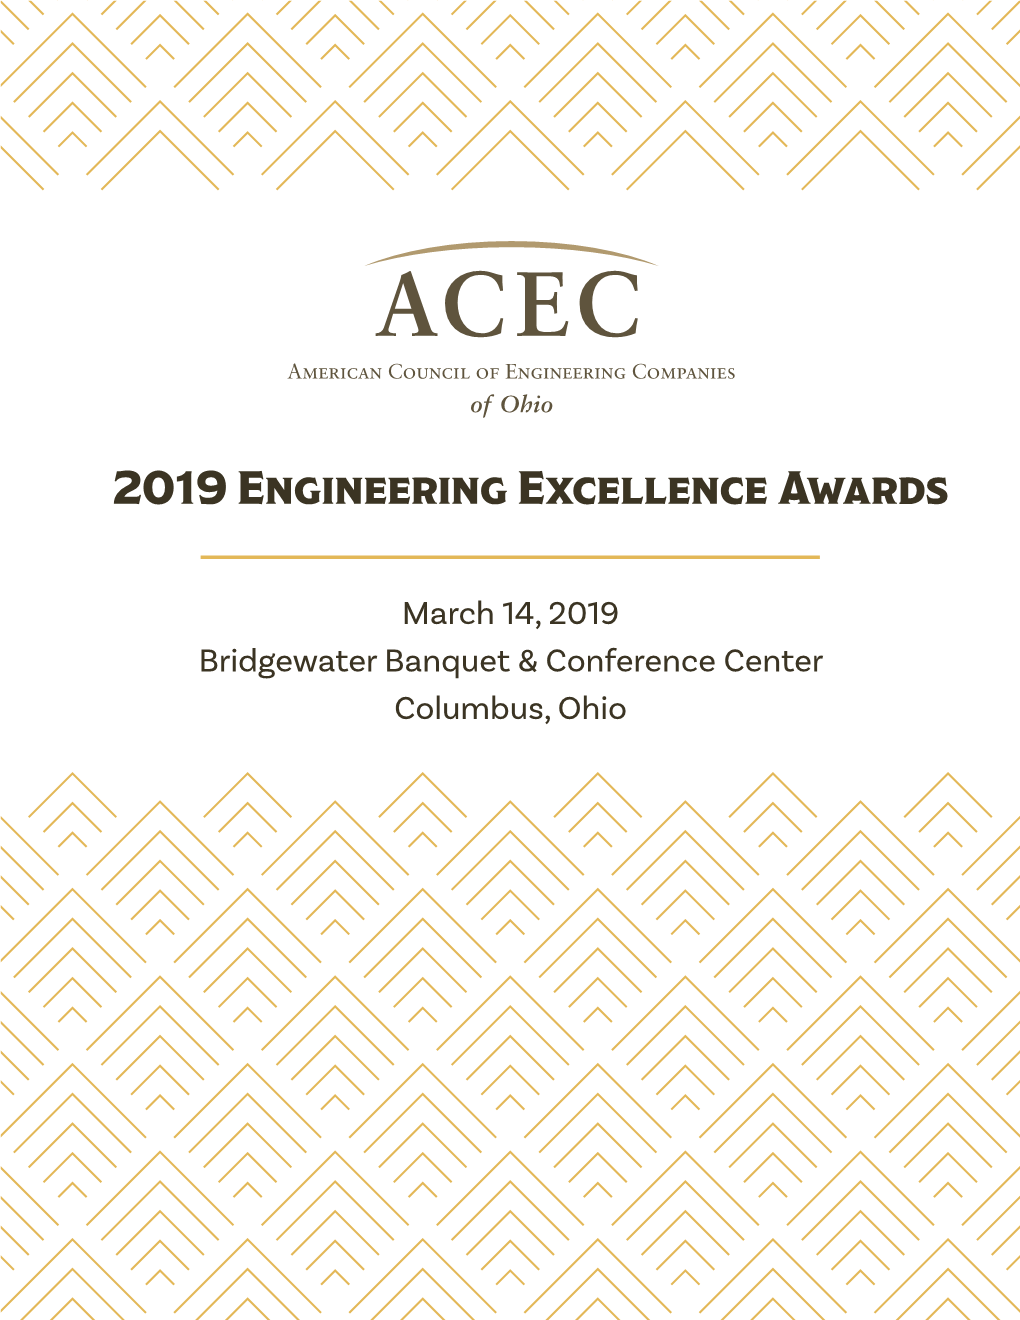 2019 Engineering Excellence Awards